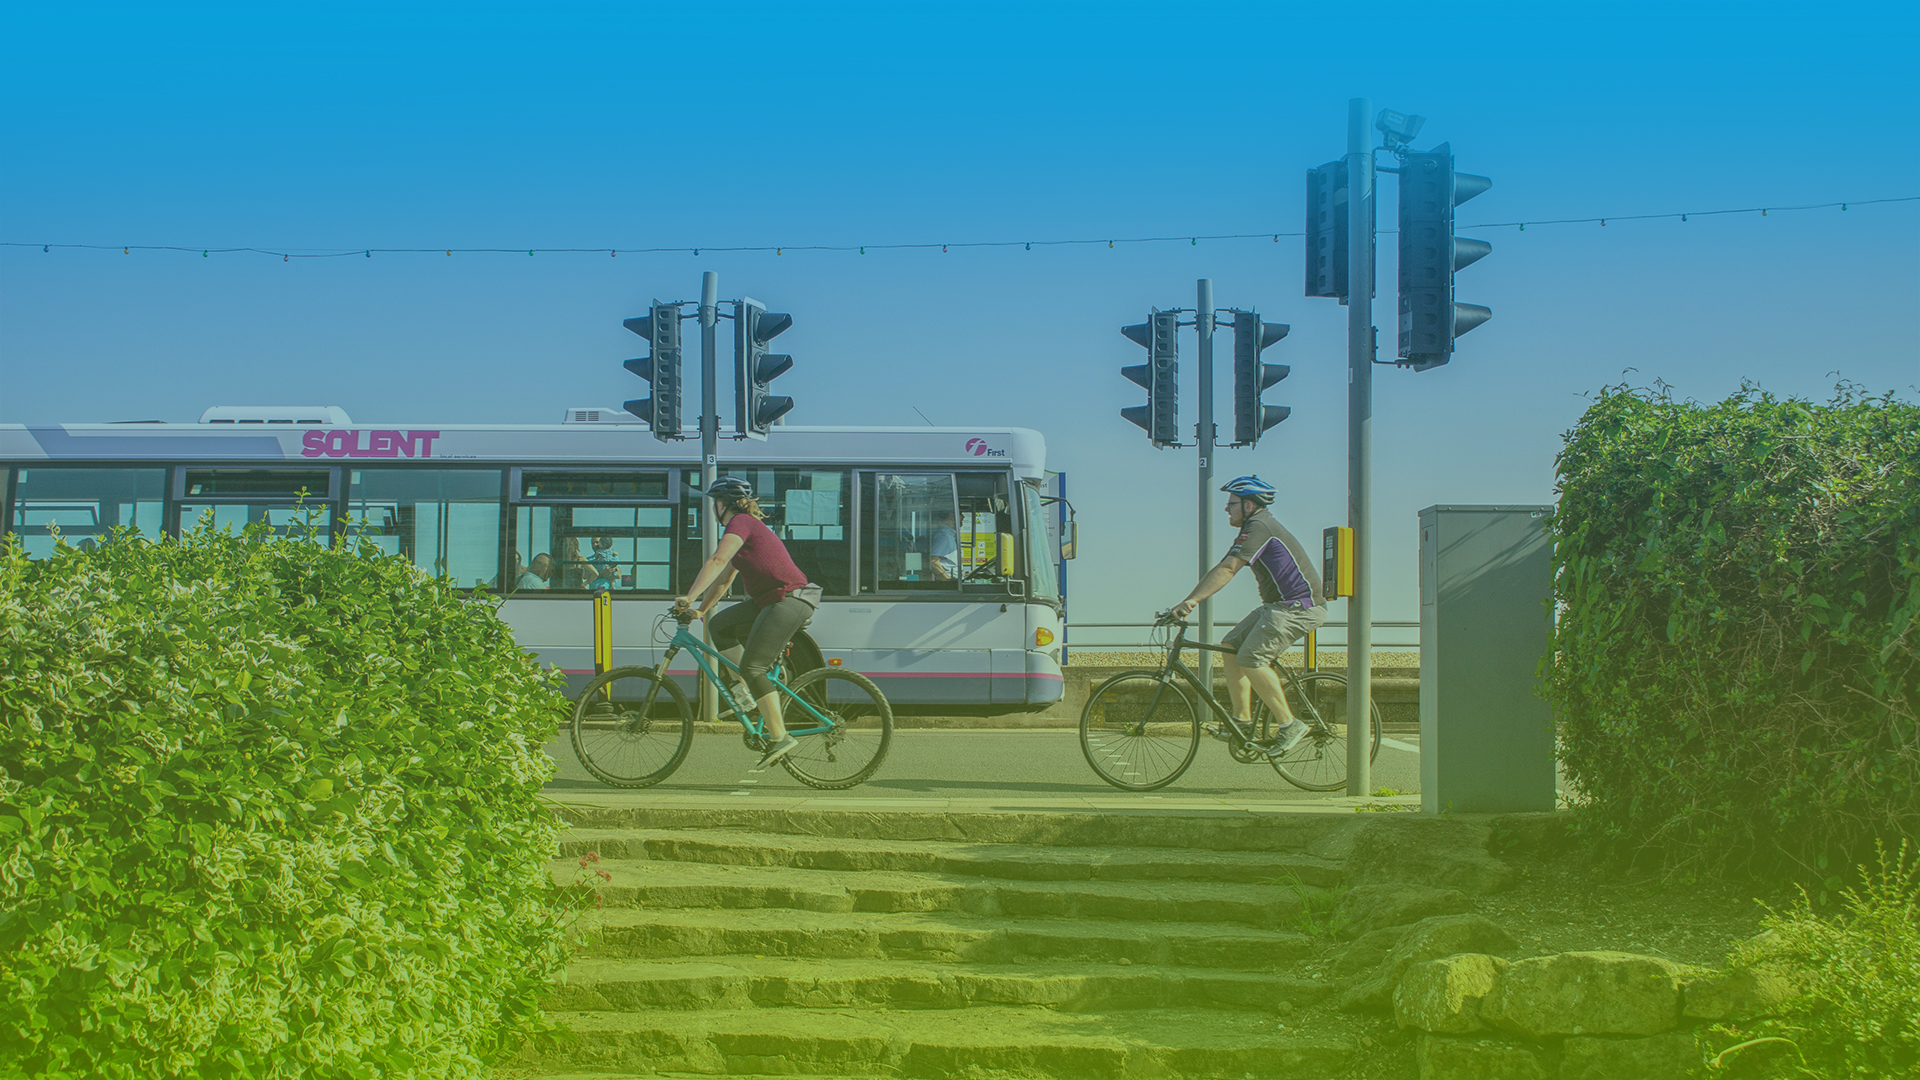 Image of cyclists and bus by a traffic light